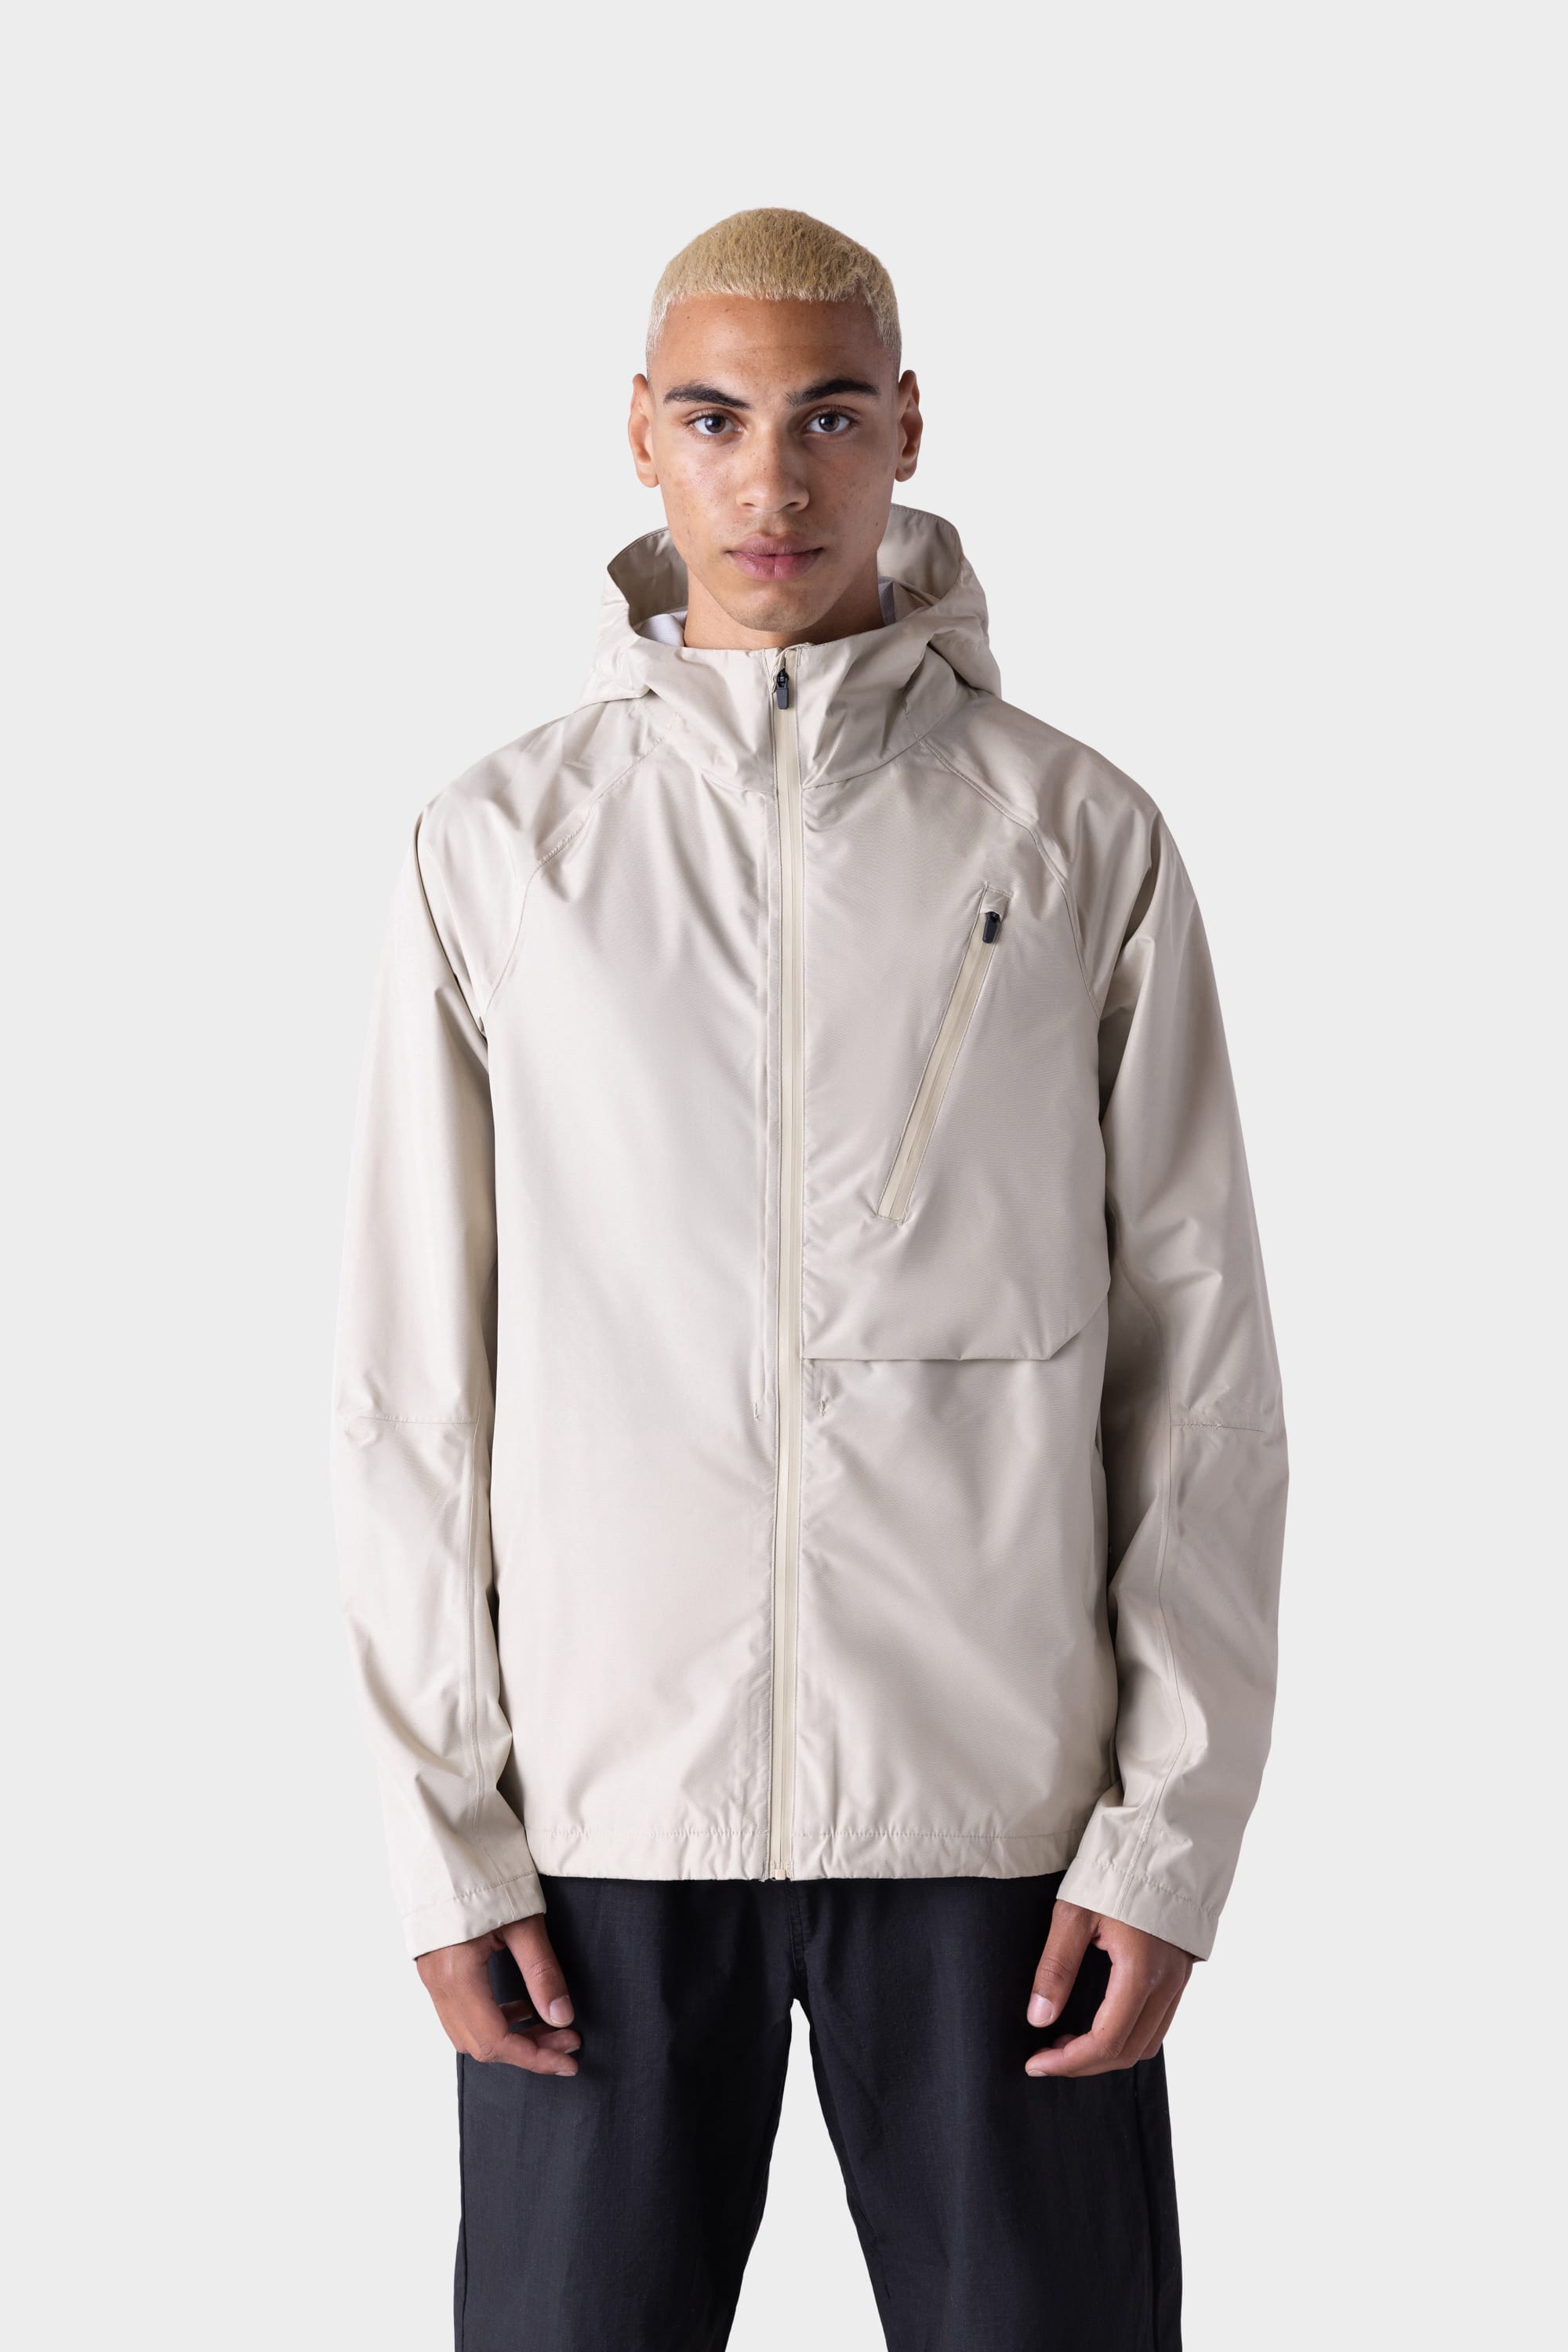 All Weather Jacket